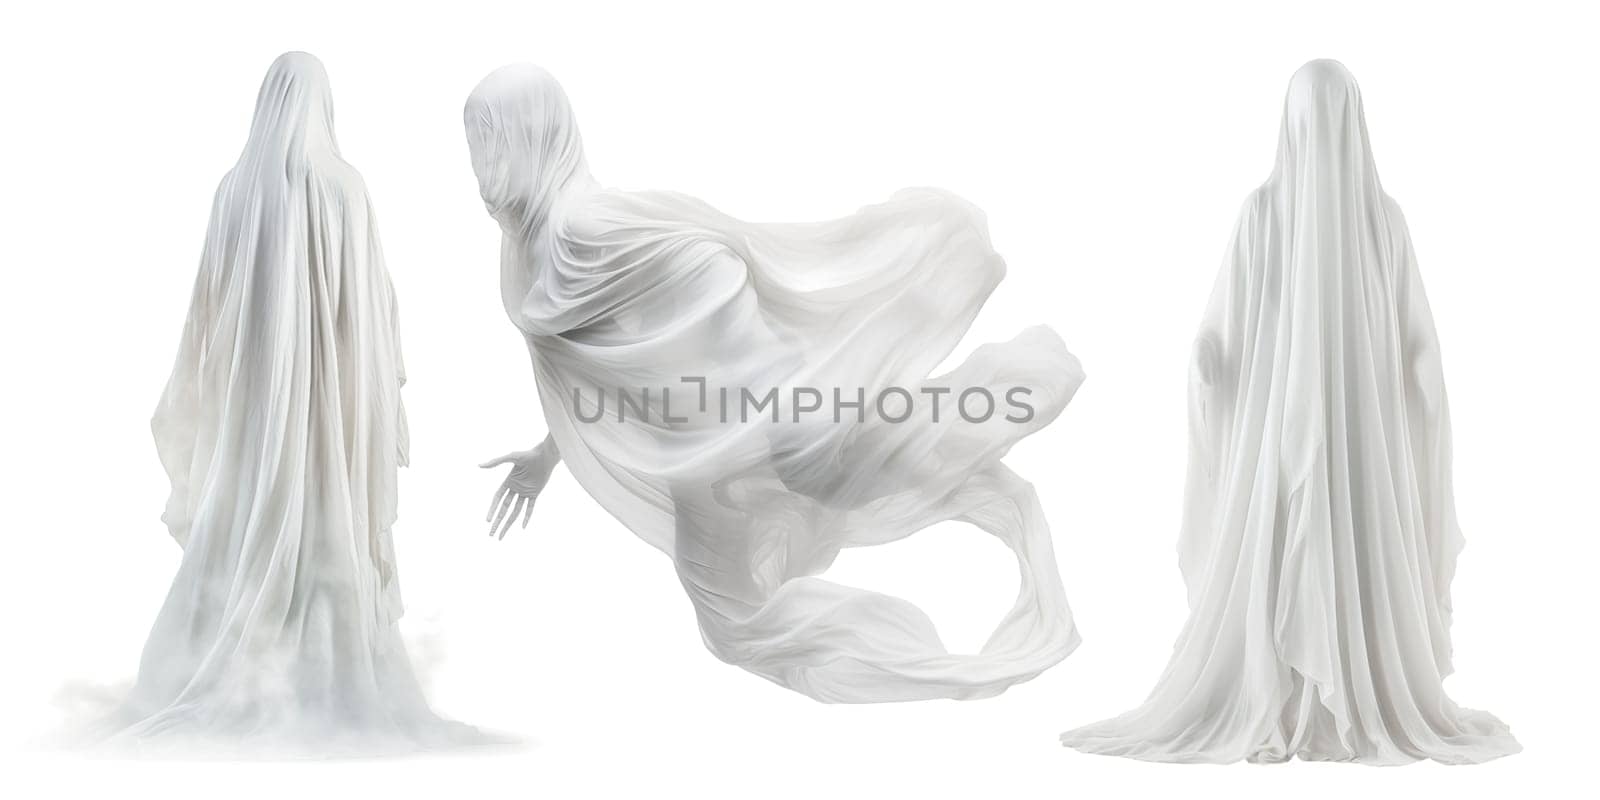 A set of ghosts flying in different directions cut out on a transparent background. A ghost on a transparent background in PNG format for inserting into a design or project